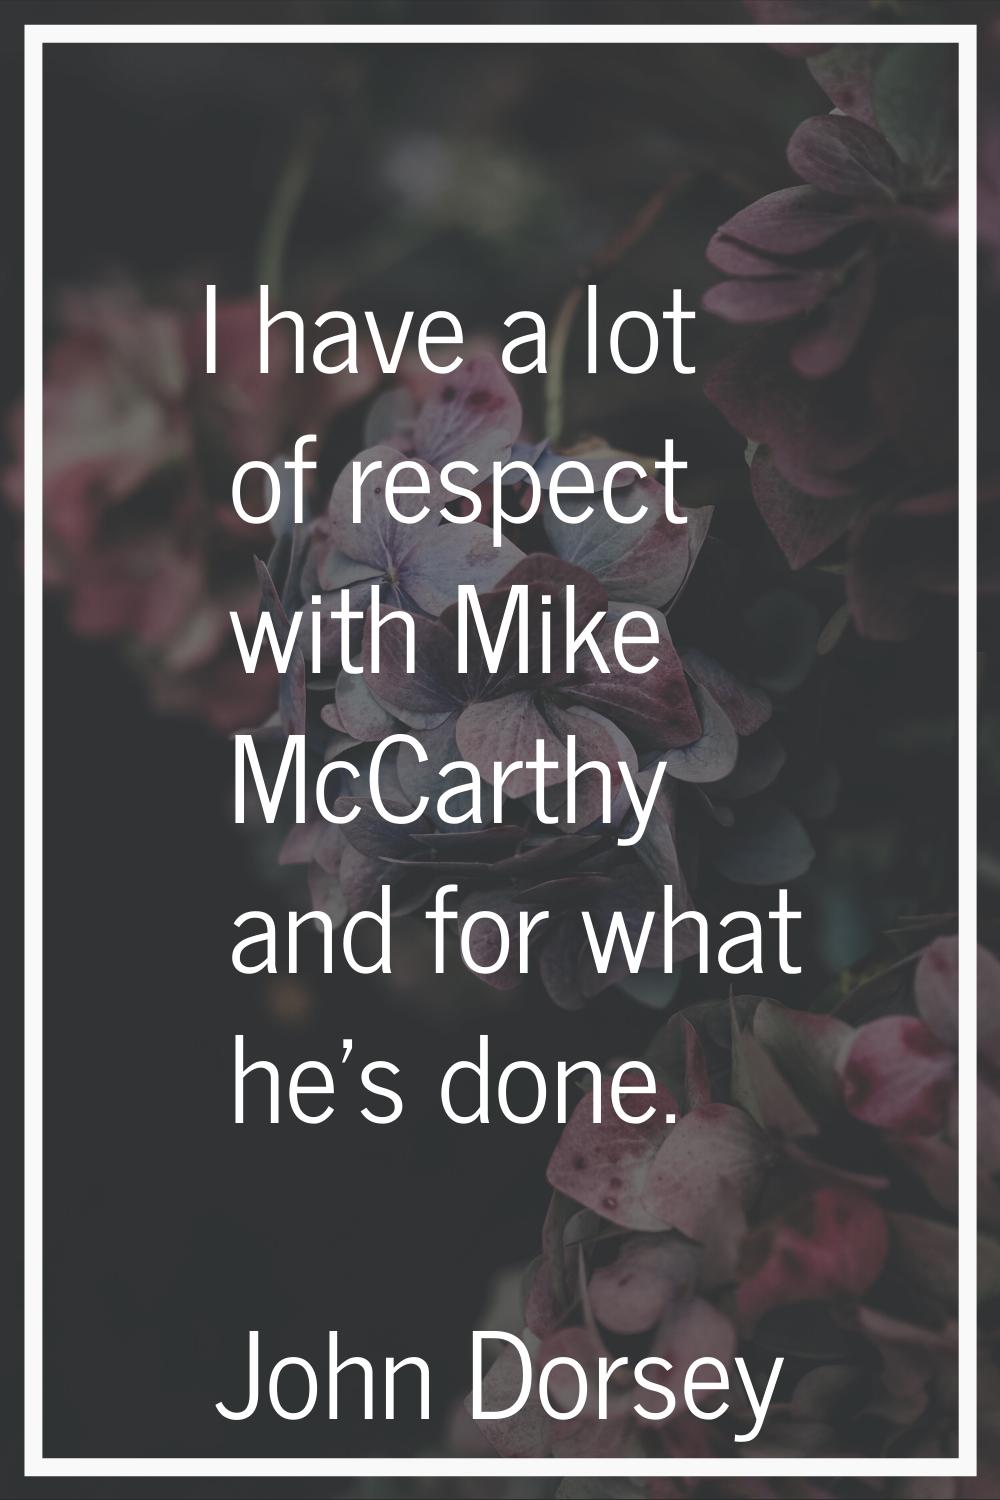 I have a lot of respect with Mike McCarthy and for what he's done.